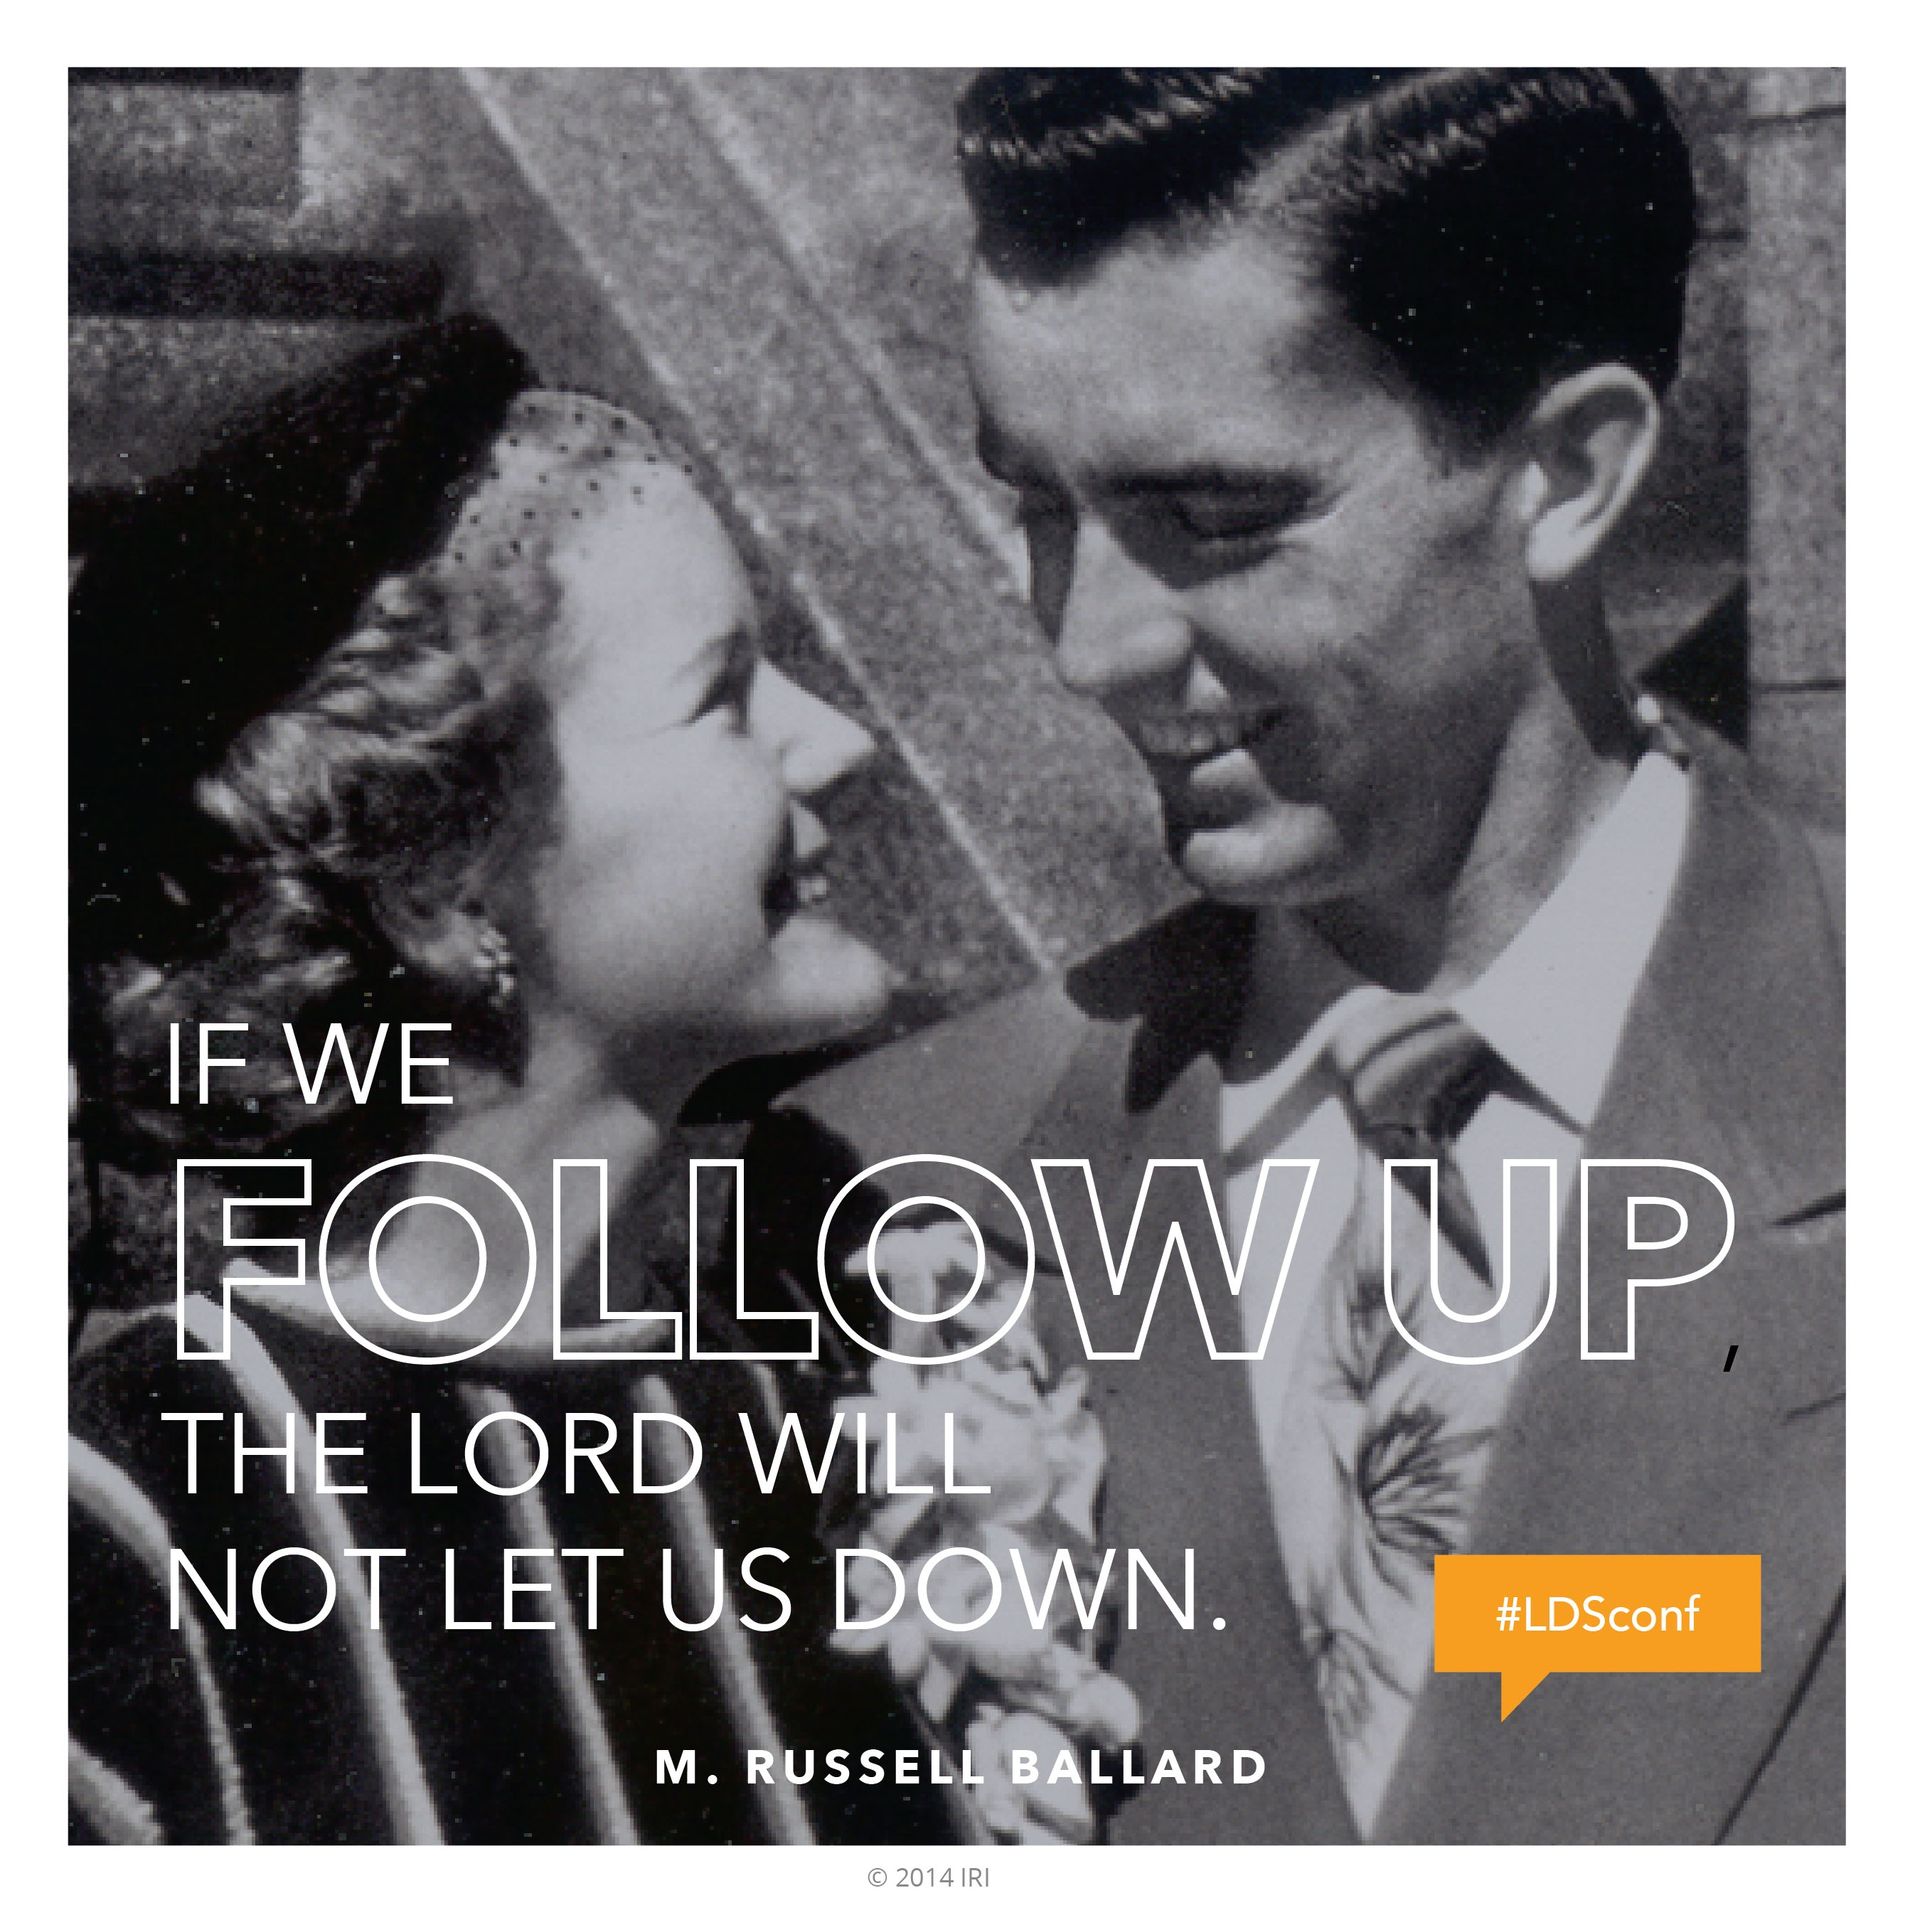 “If we follow up, the Lord will not let us down.”—Elder M. Russell Ballard, “Following Up”